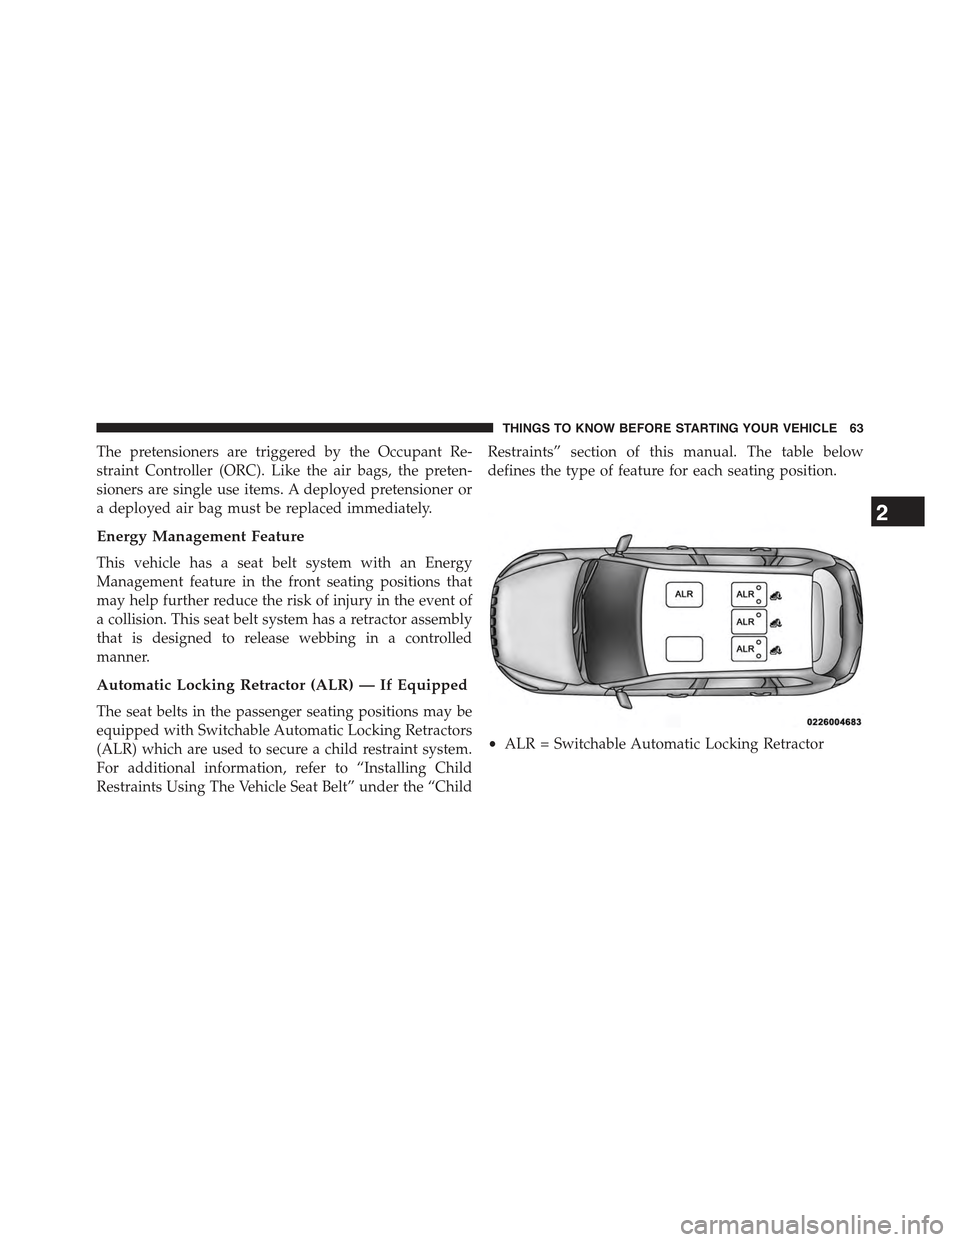 JEEP CHEROKEE 2015 KL / 5.G Owners Manual The pretensioners are triggered by the Occupant Re-
straint Controller (ORC). Like the air bags, the preten-
sioners are single use items. A deployed pretensioner or
a deployed air bag must be replace